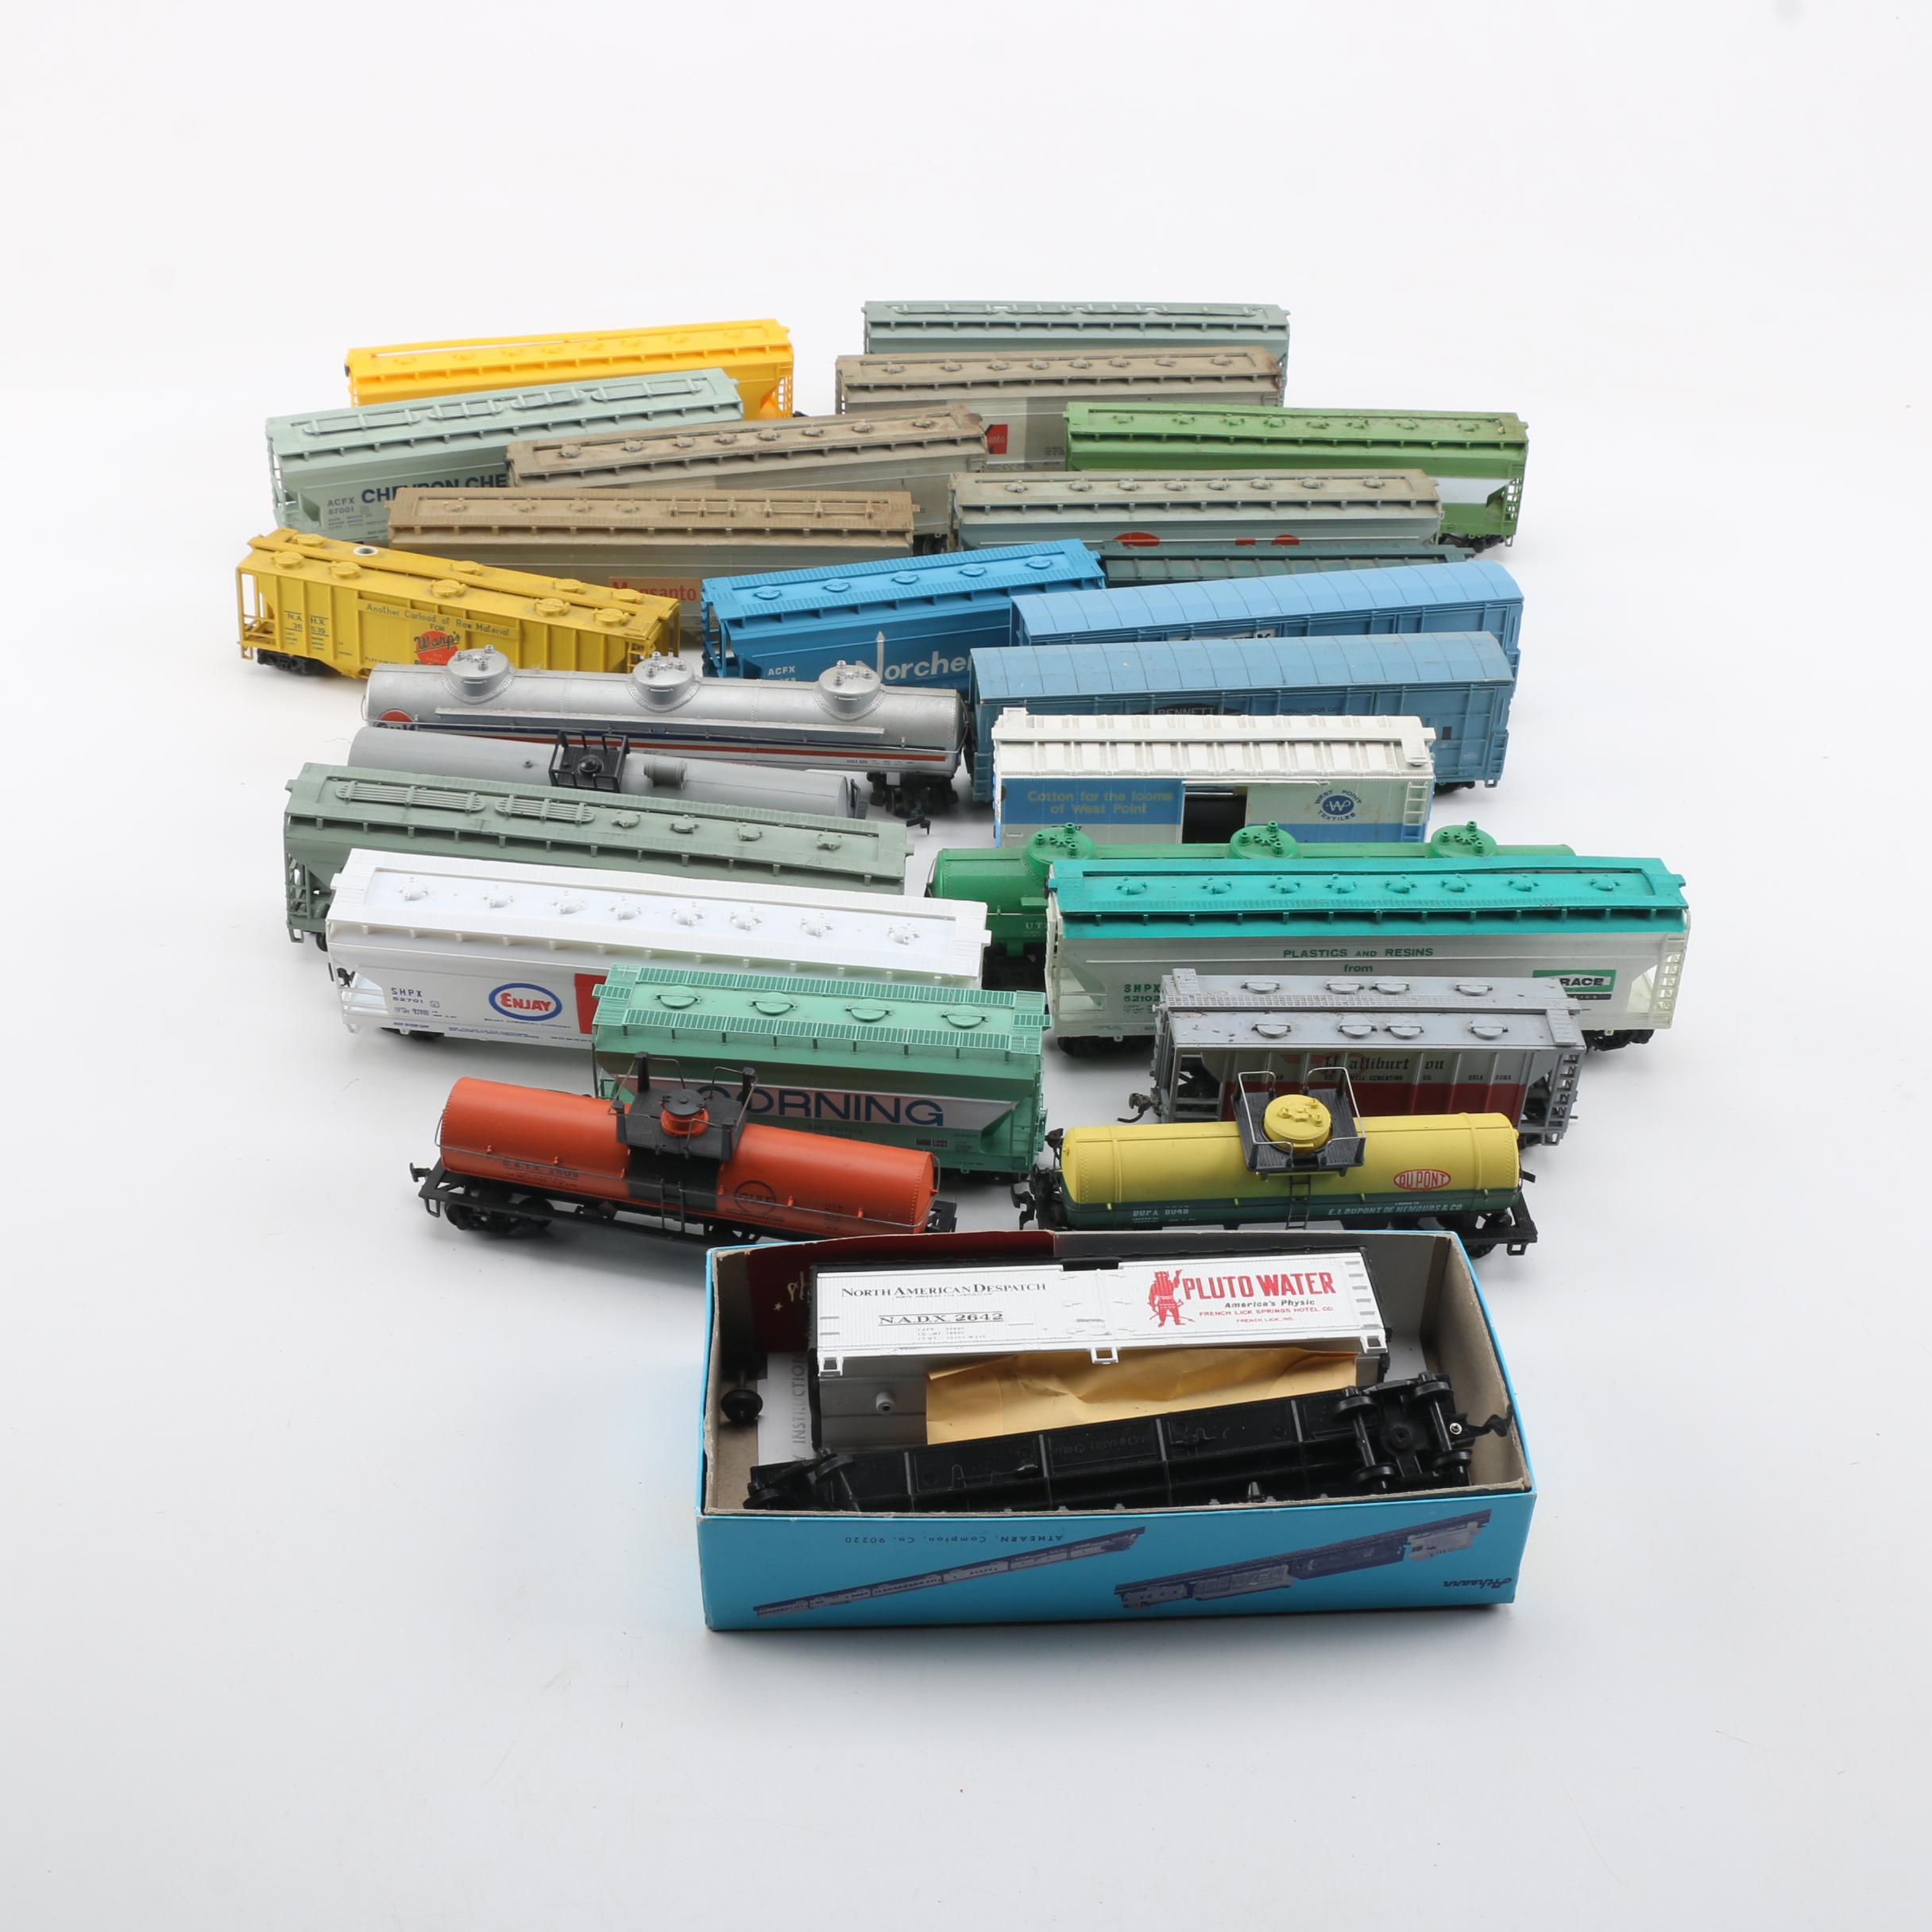 Athearn Vintage Blue Box HO Scale Freight car Kits Variation Listing price each 